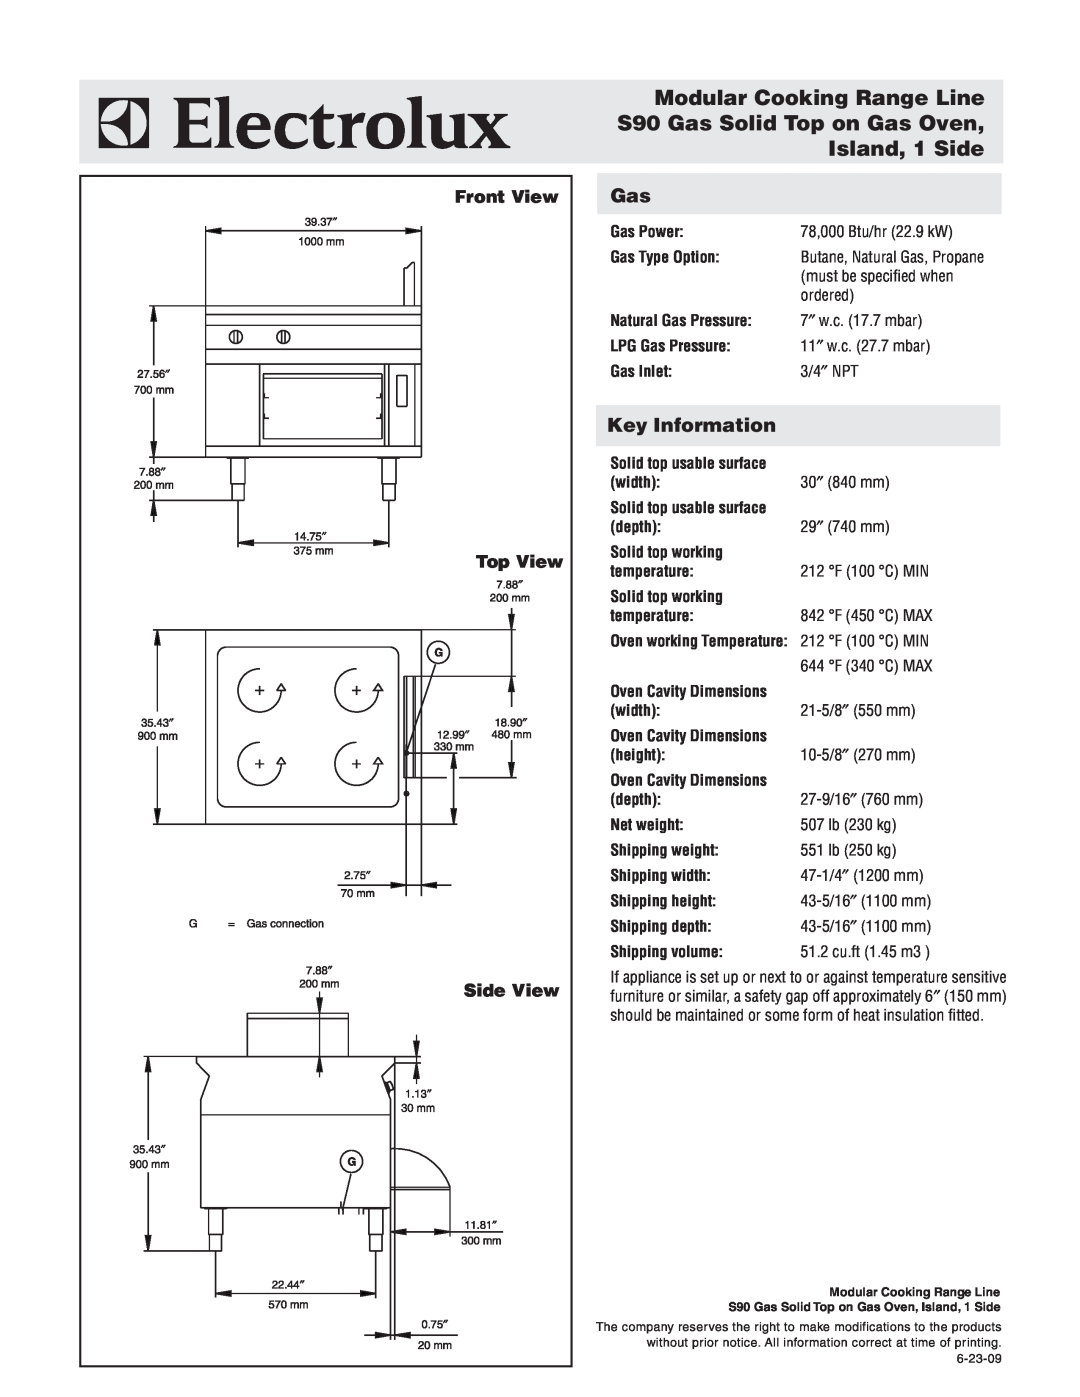 Electrolux 584161 Front View, Top View, Side View, Key Information, 78,000 Btu/hr 22.9 kW, must be specified when, ordered 